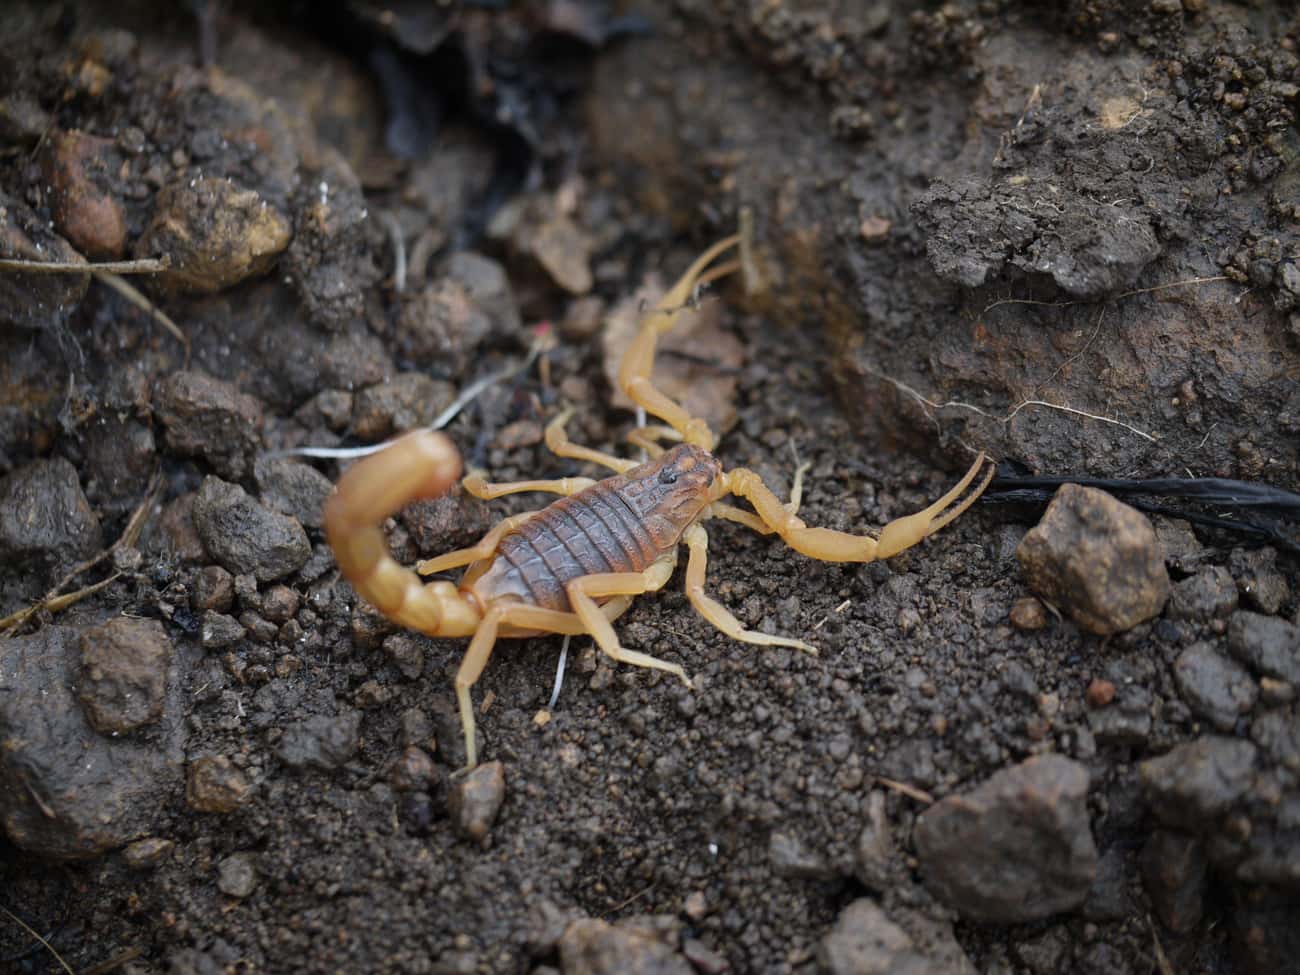 The Indian Red Scorpion Is One Of The Most Deadly In The World